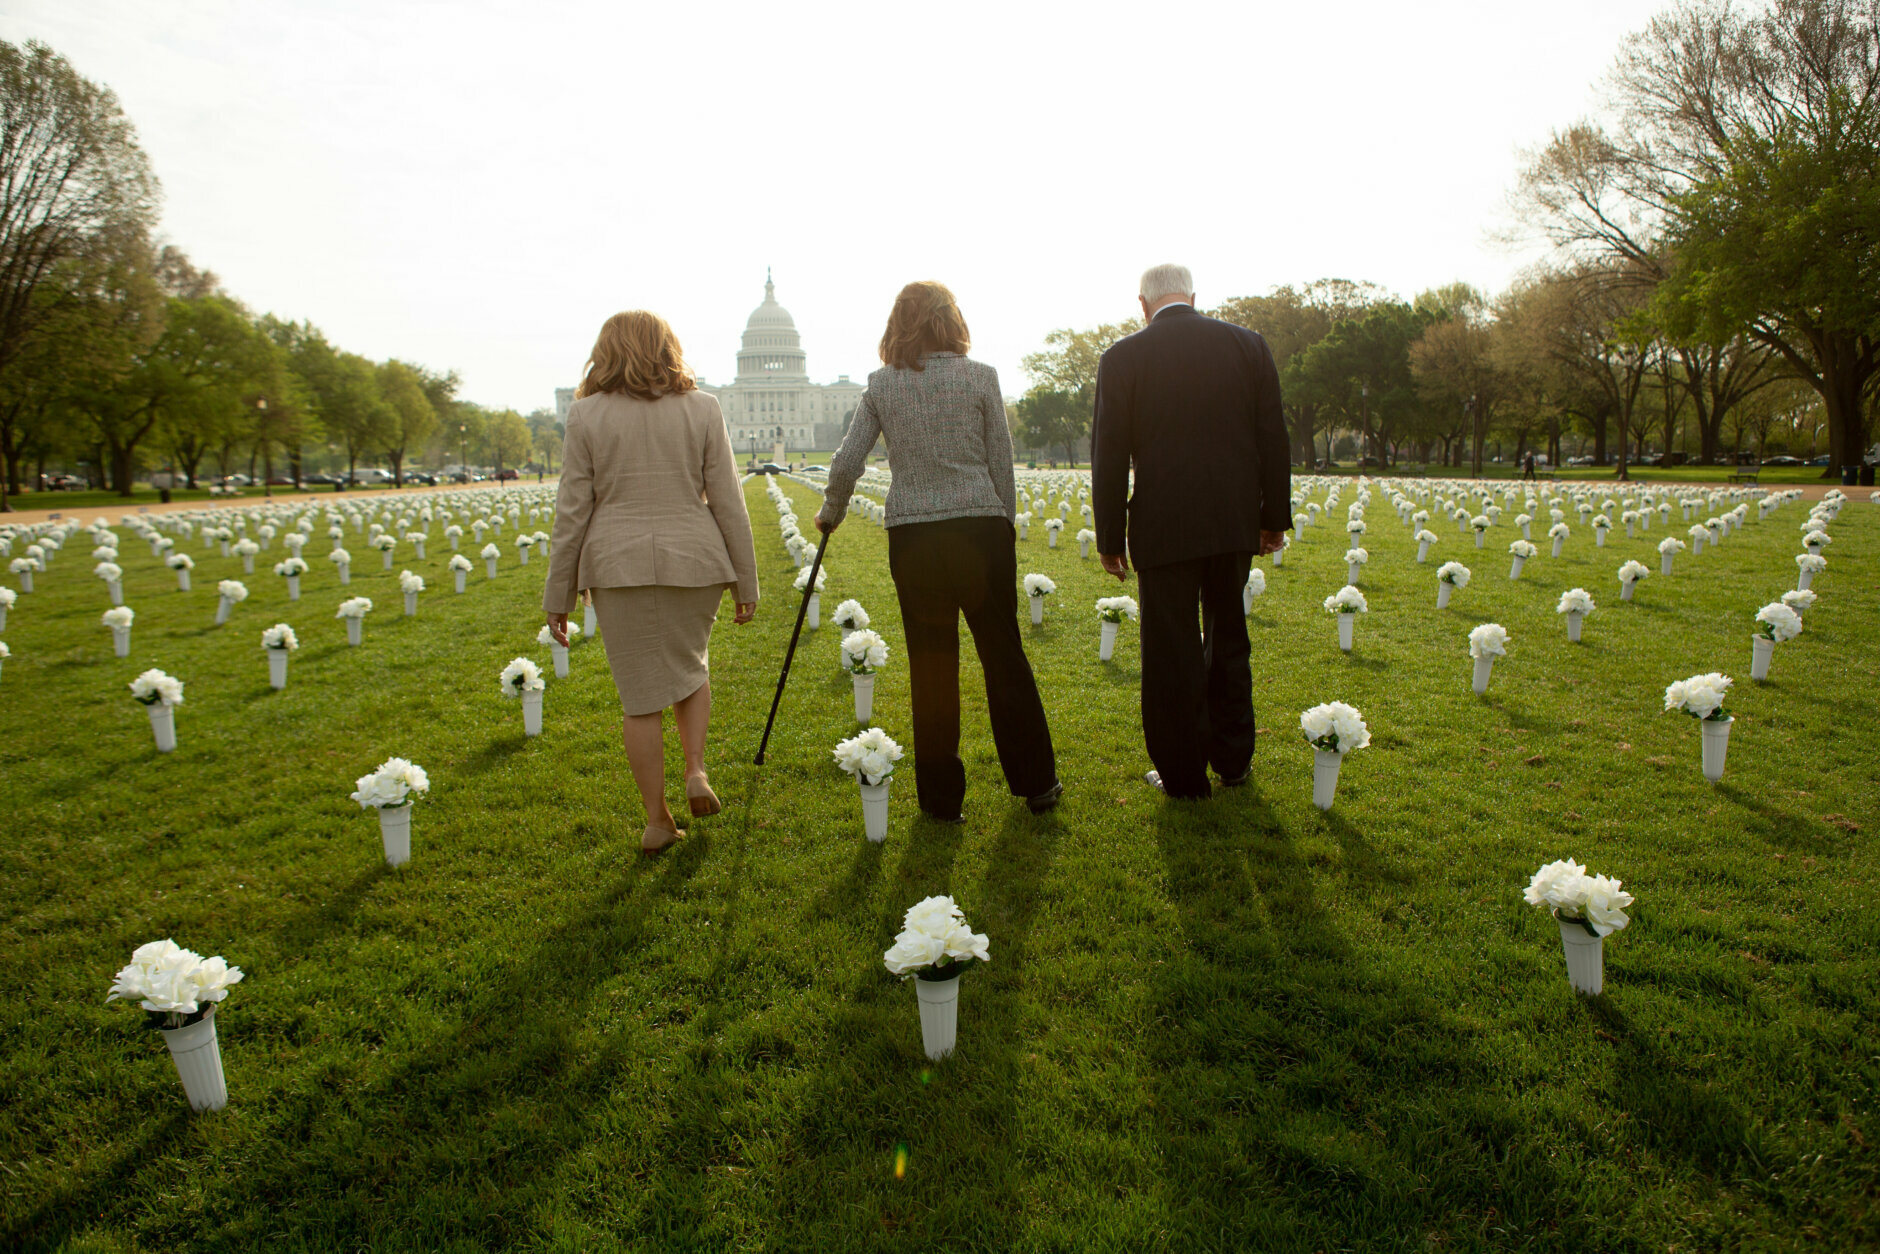 A press conference inaugurates the Gun Violence Memorial, a temporary installation consisting of 40,000 silk flowers, on the National Mall in Washington, D.C., April 14, 2021. (photo by Allison Shelley/Emic Films)